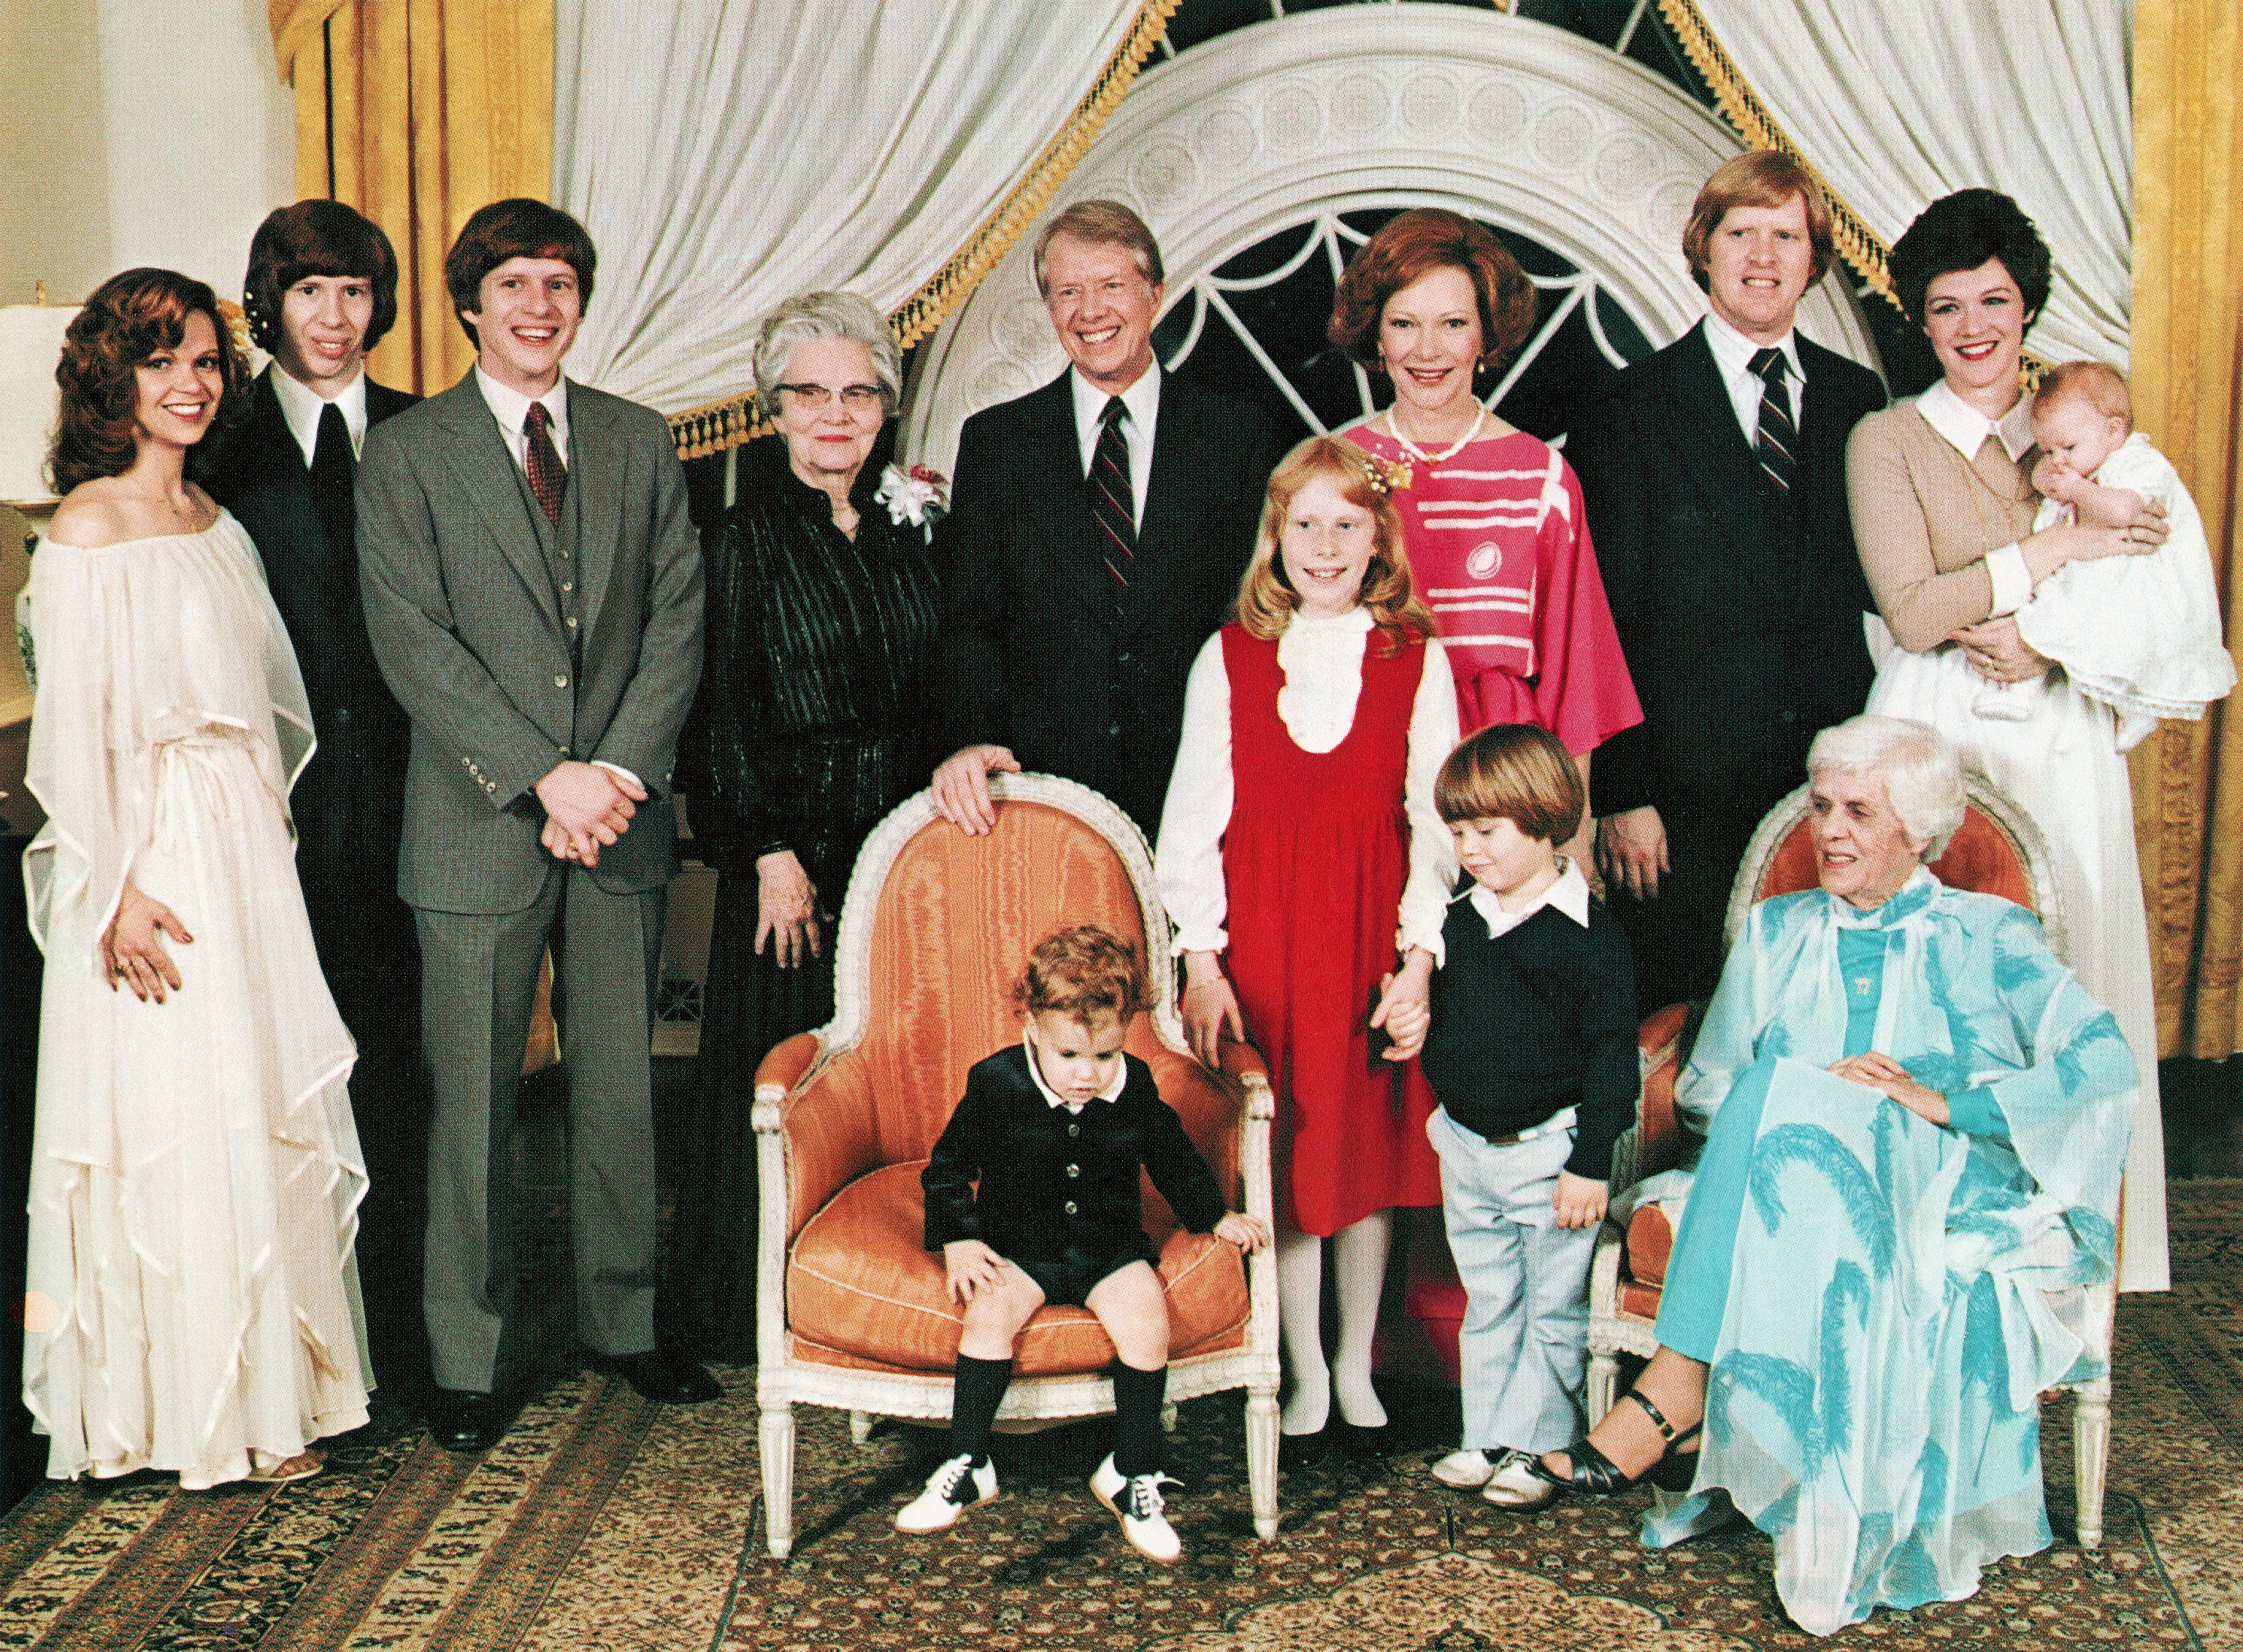 A portrait of President Jimmy Carter and his extended family | Source: Getty Images